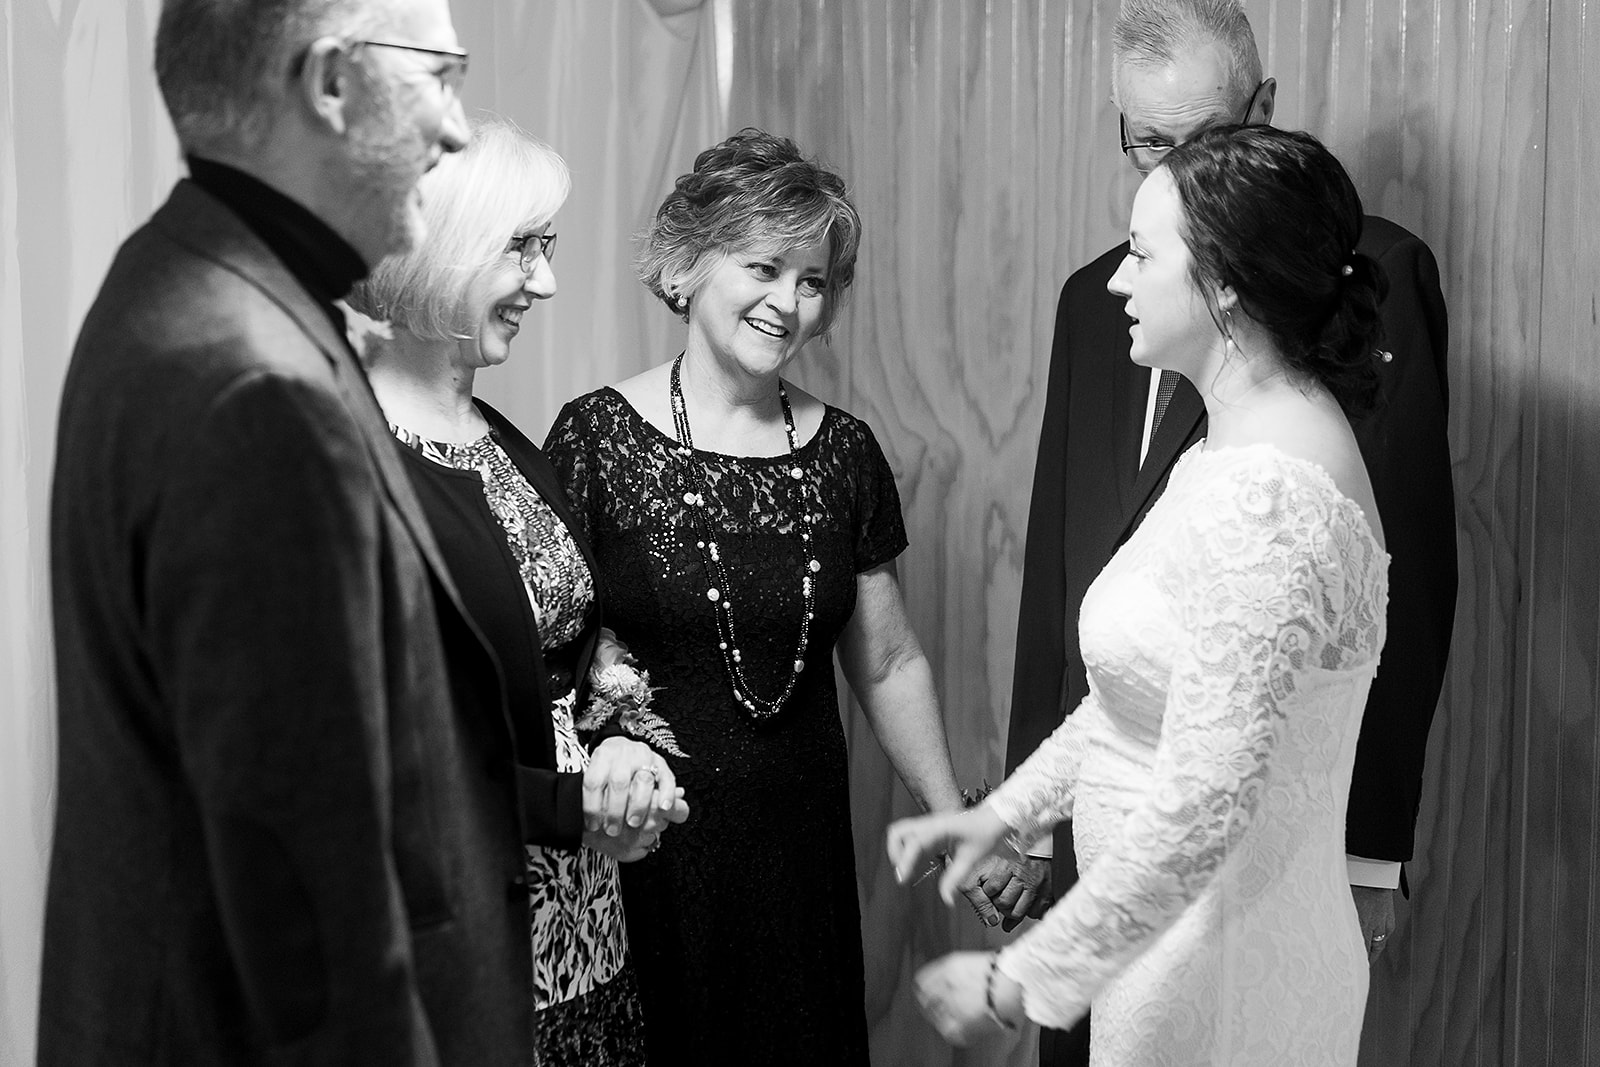 family embrace together before wedding ceremony at port gamble